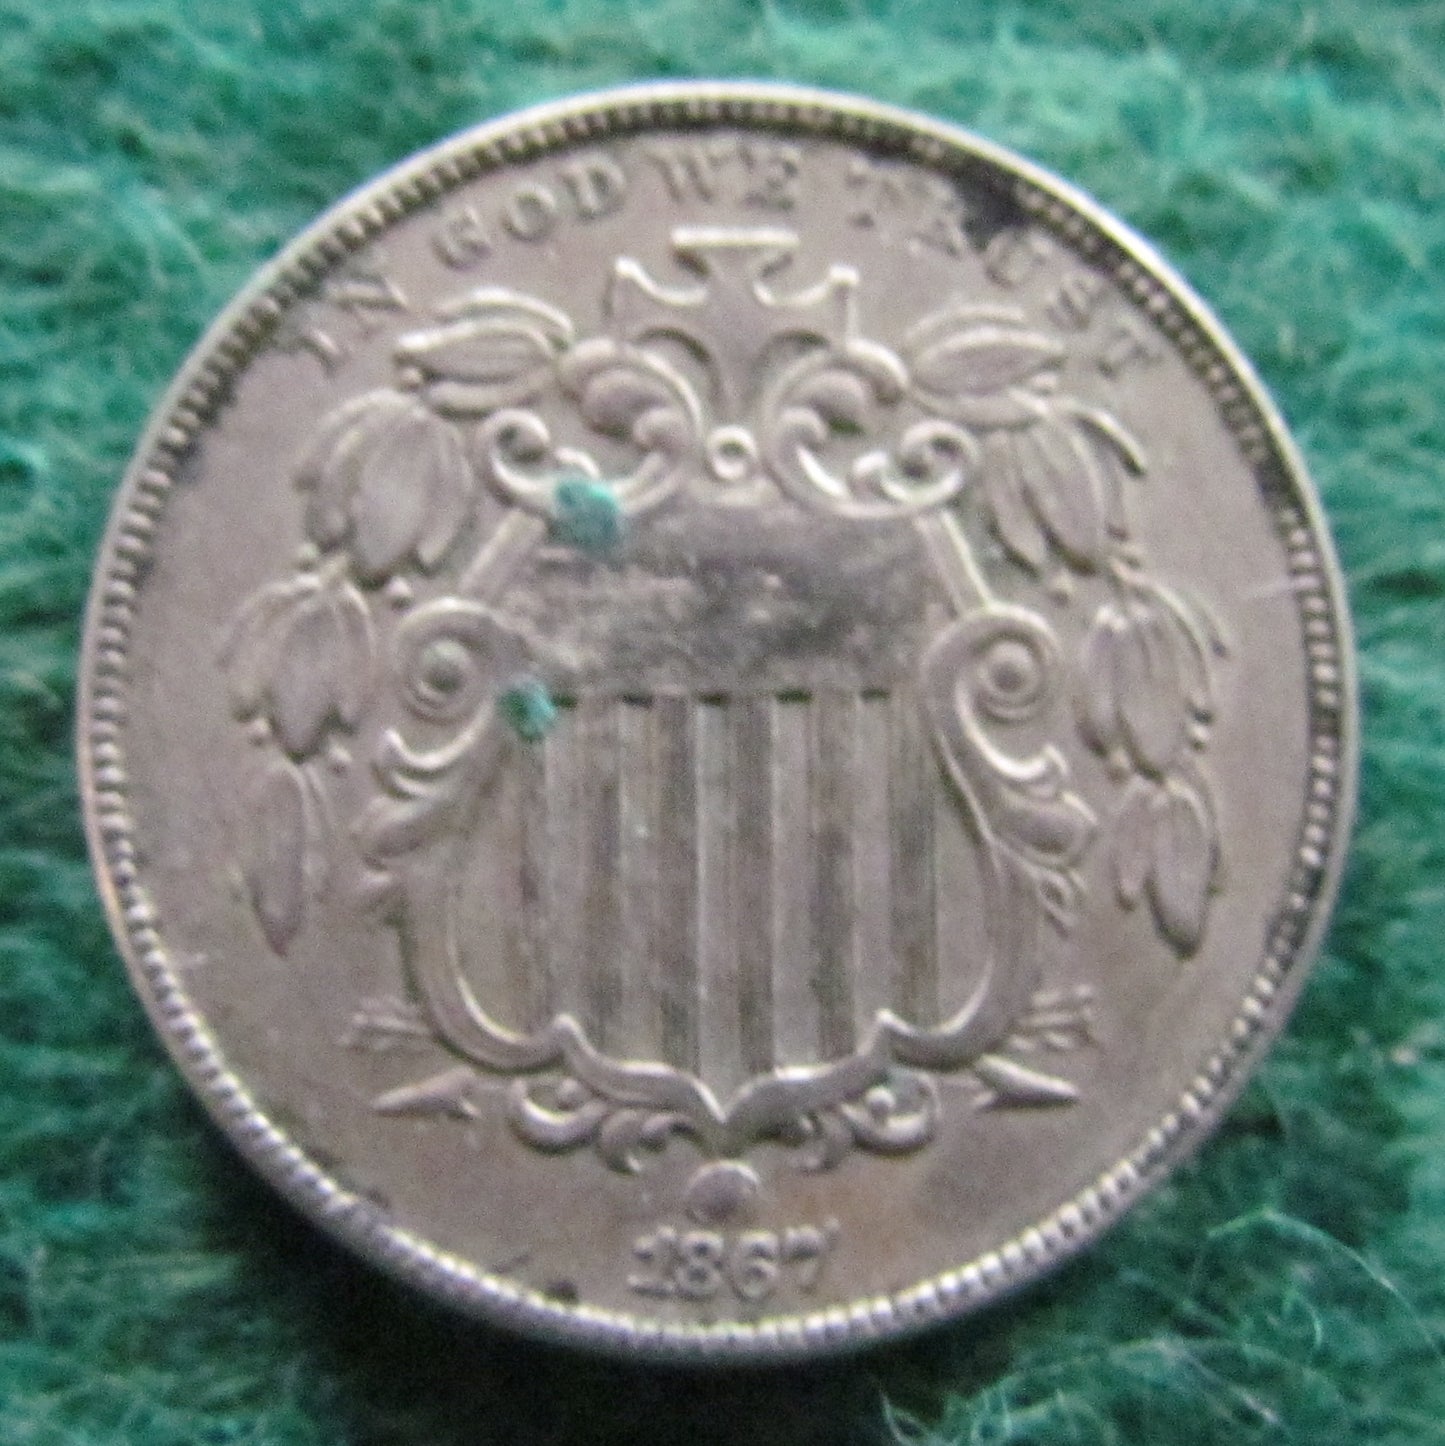 USA American 1867 Shield Nickel Coin  - Circulated Struck From Cracked Die